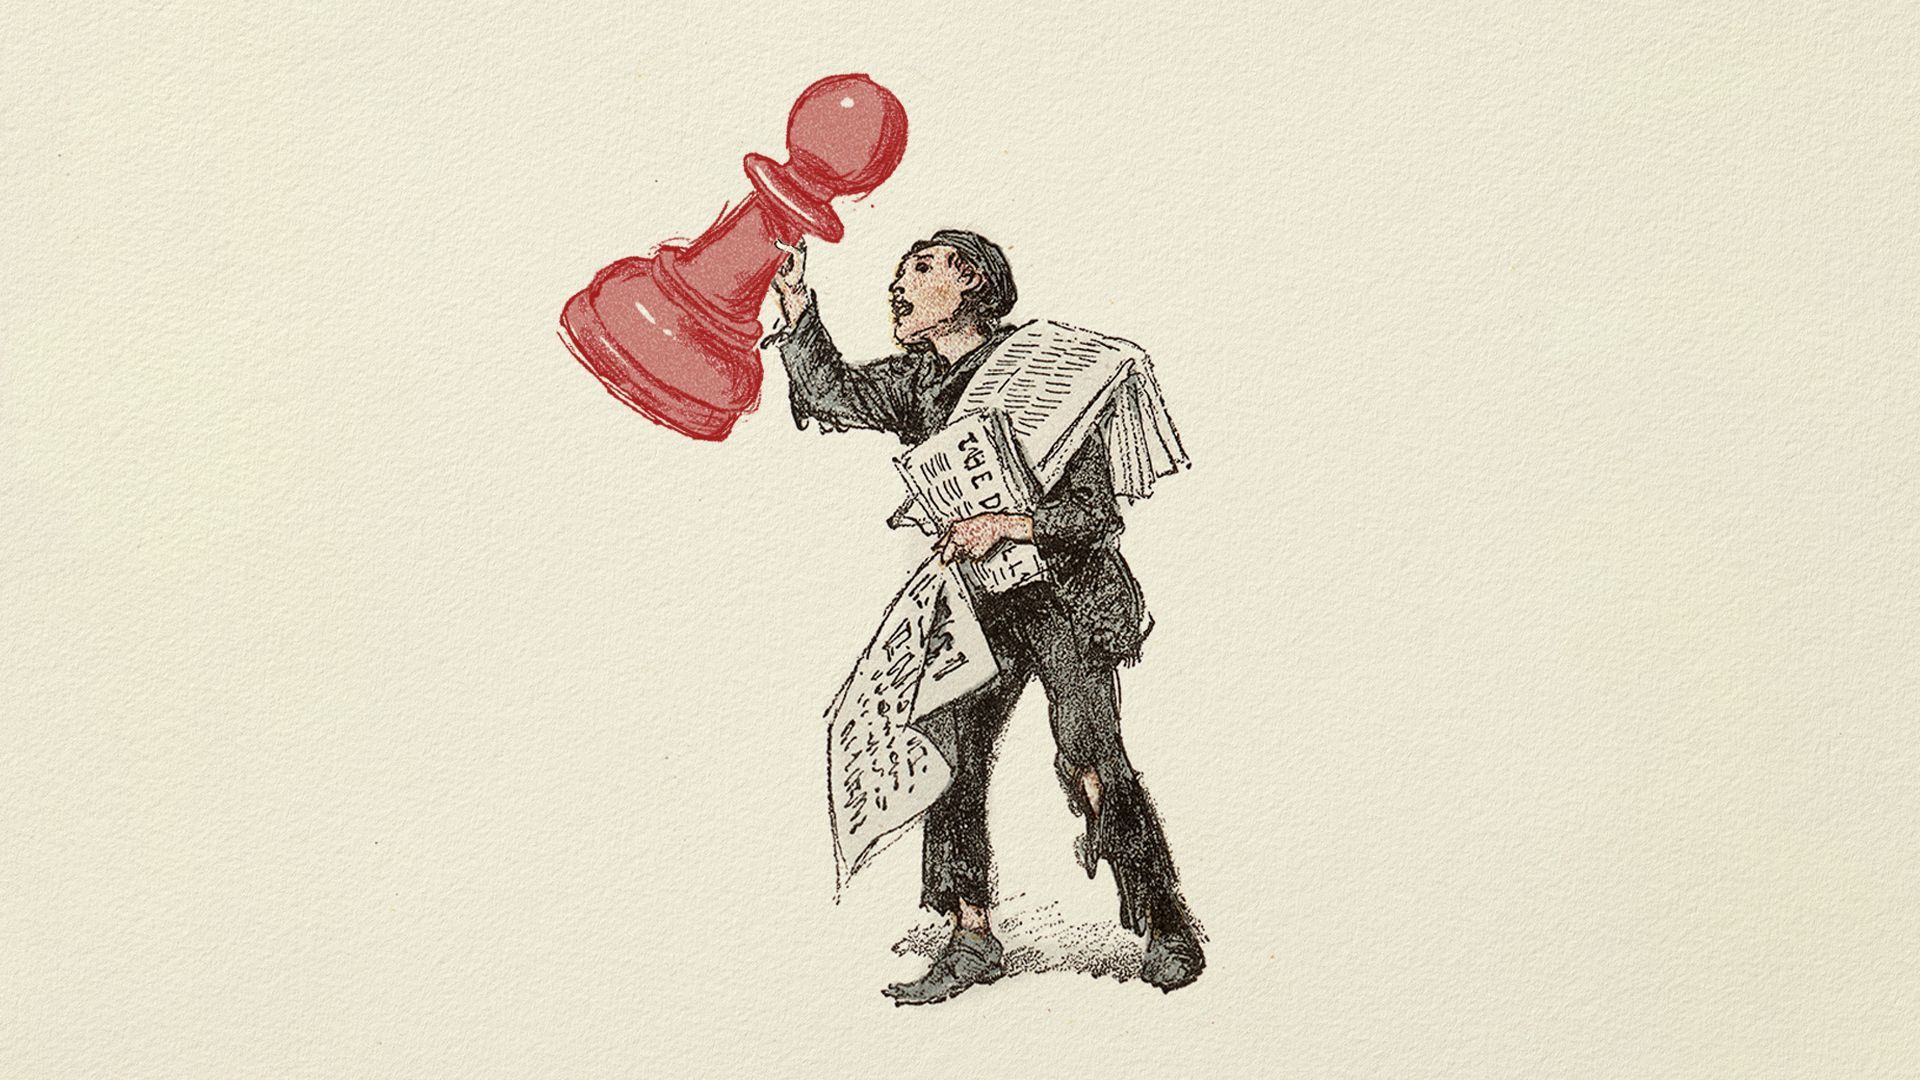 Illustration of a paperboy with newspapers over his shoulder and in one hand and a large game piece raised in his other hand